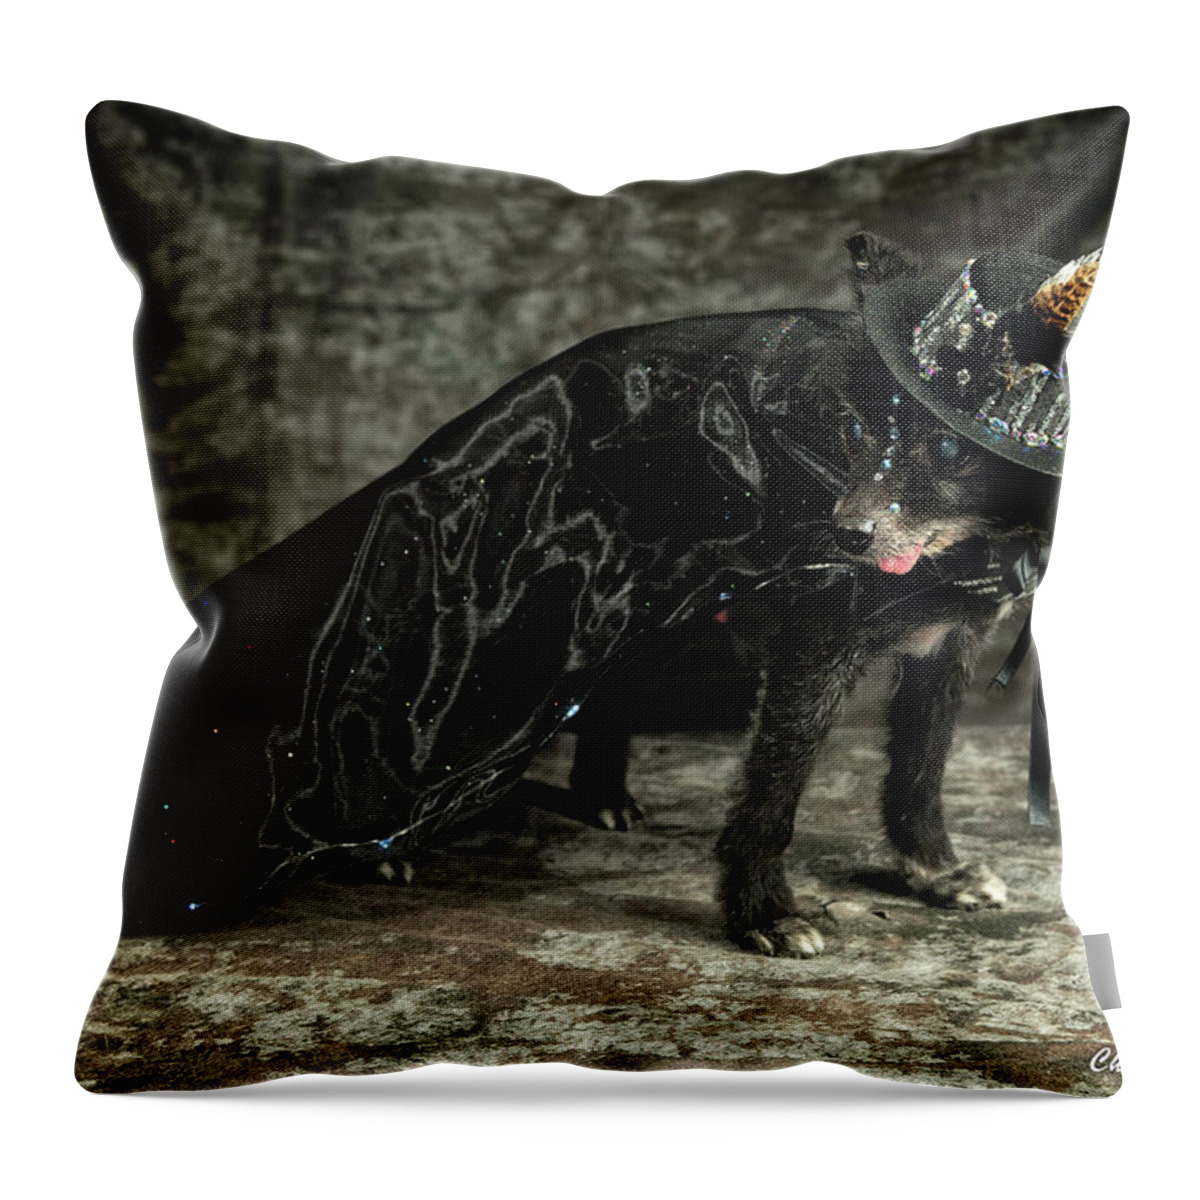 Leonard Throw Pillow featuring the photograph 20170804_ceh1124 by Christopher Holmes